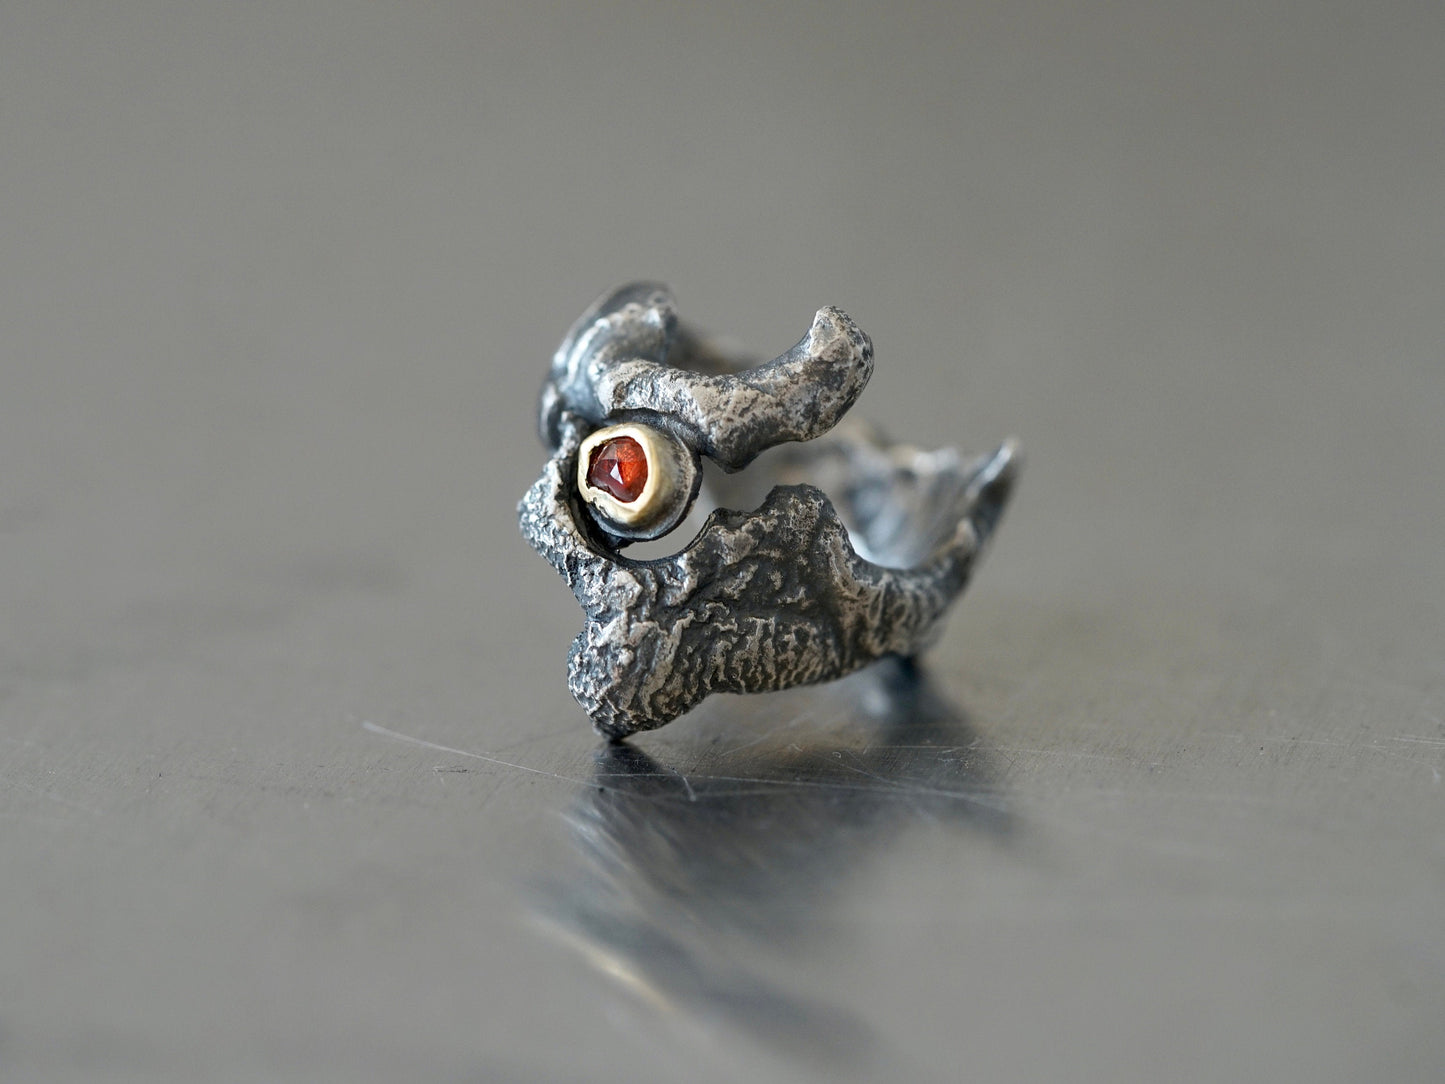 Dragon eye ring, red spinel and 22k gold, size 6.75